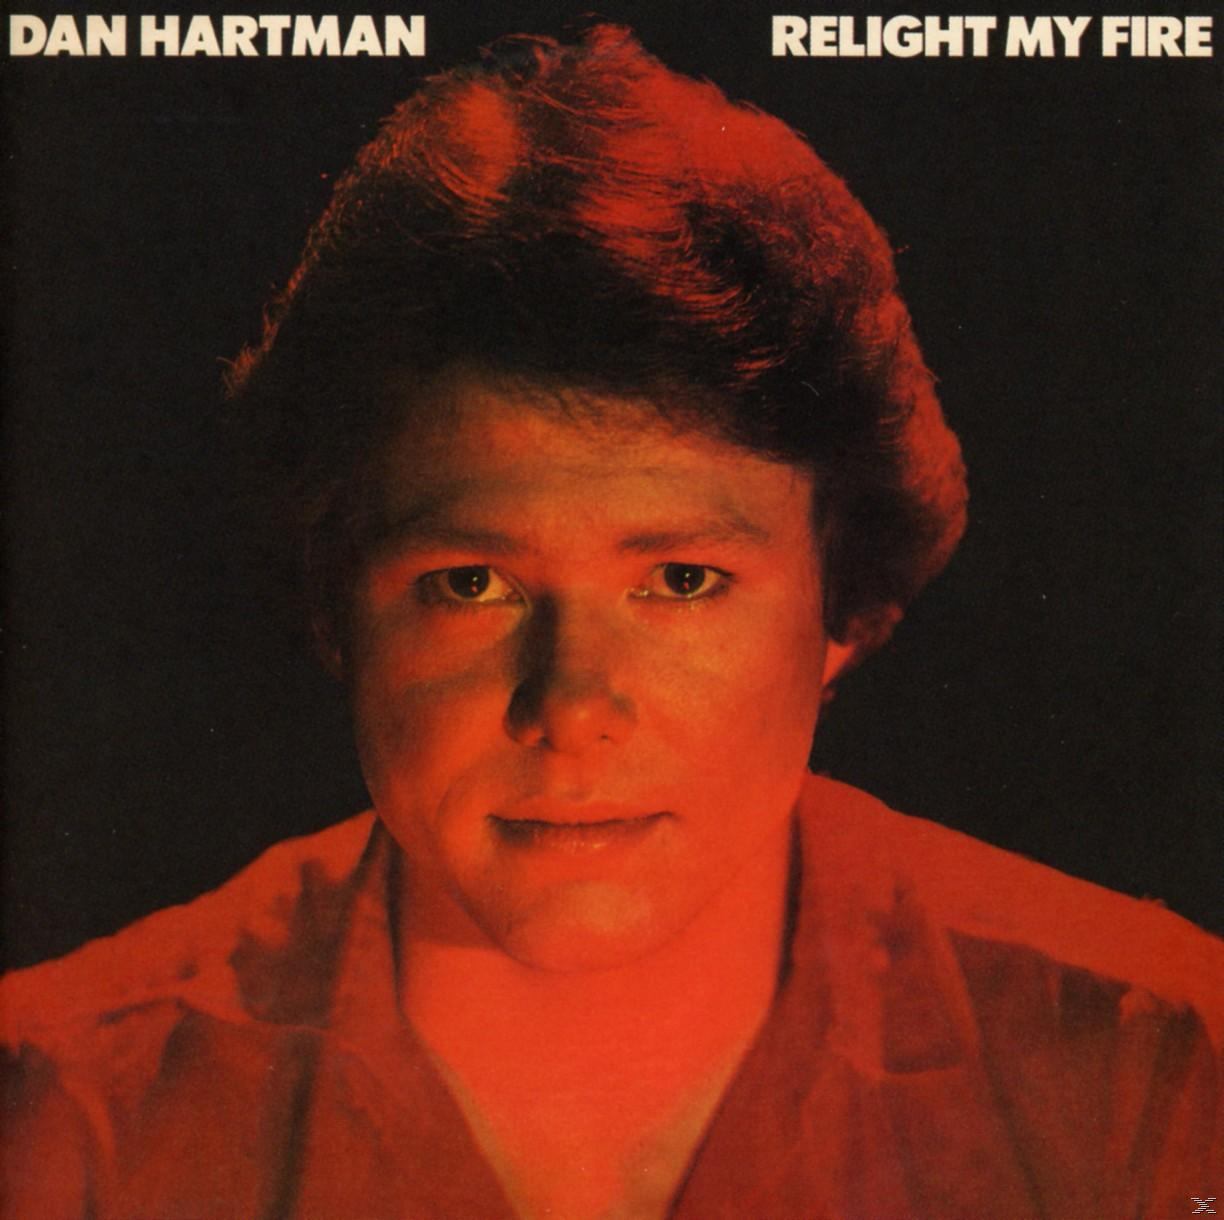 (Expanded+Remastered) - - Fire Dan My Hartman Relight (CD)